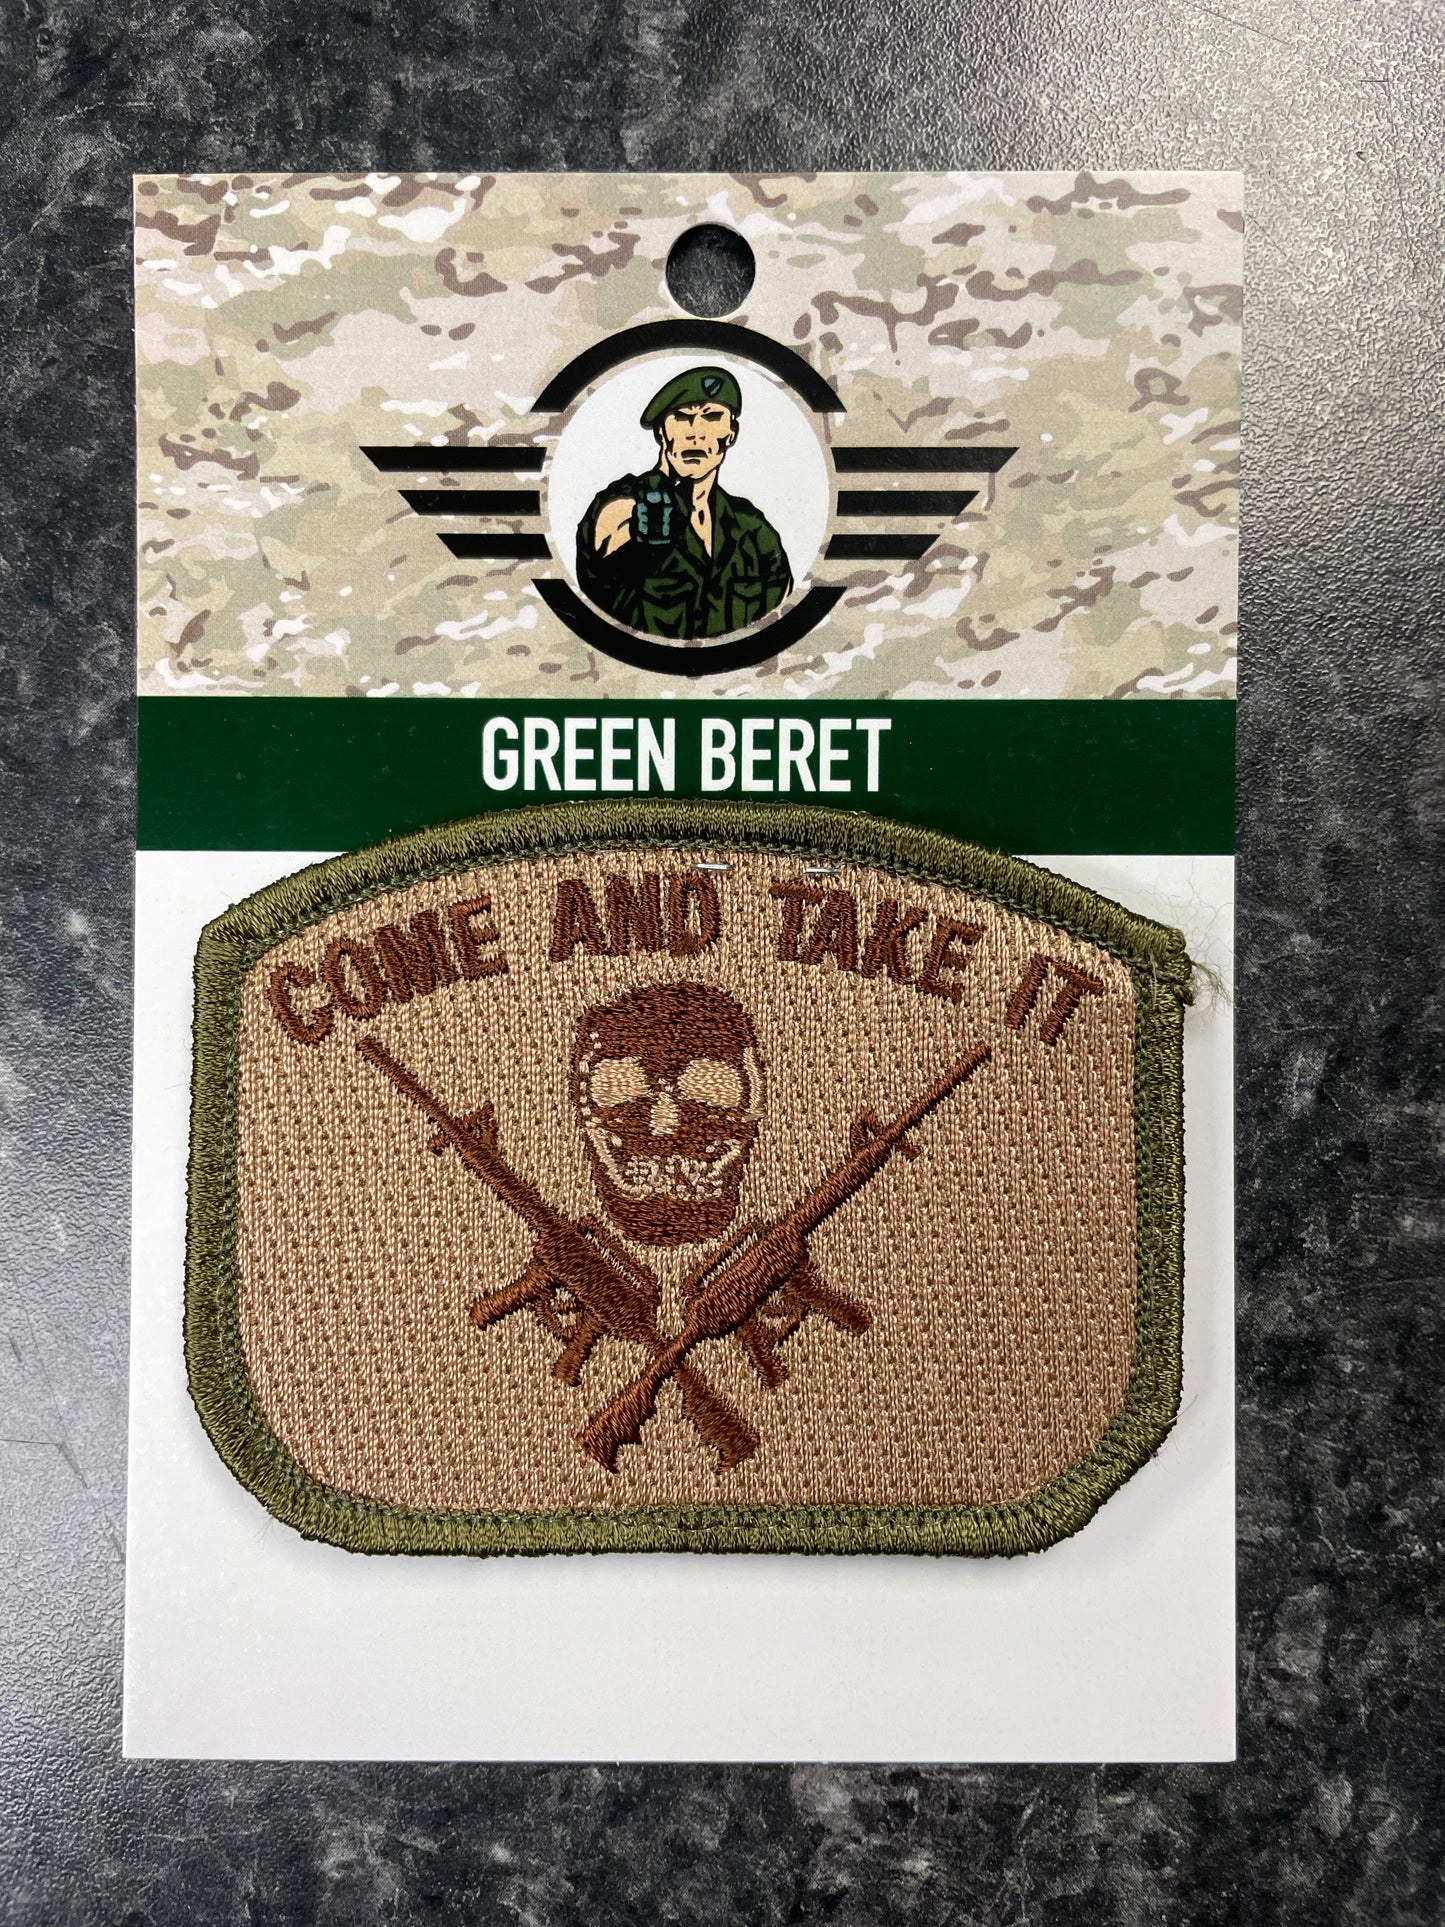 Come And Take It Skull Velcro Patch